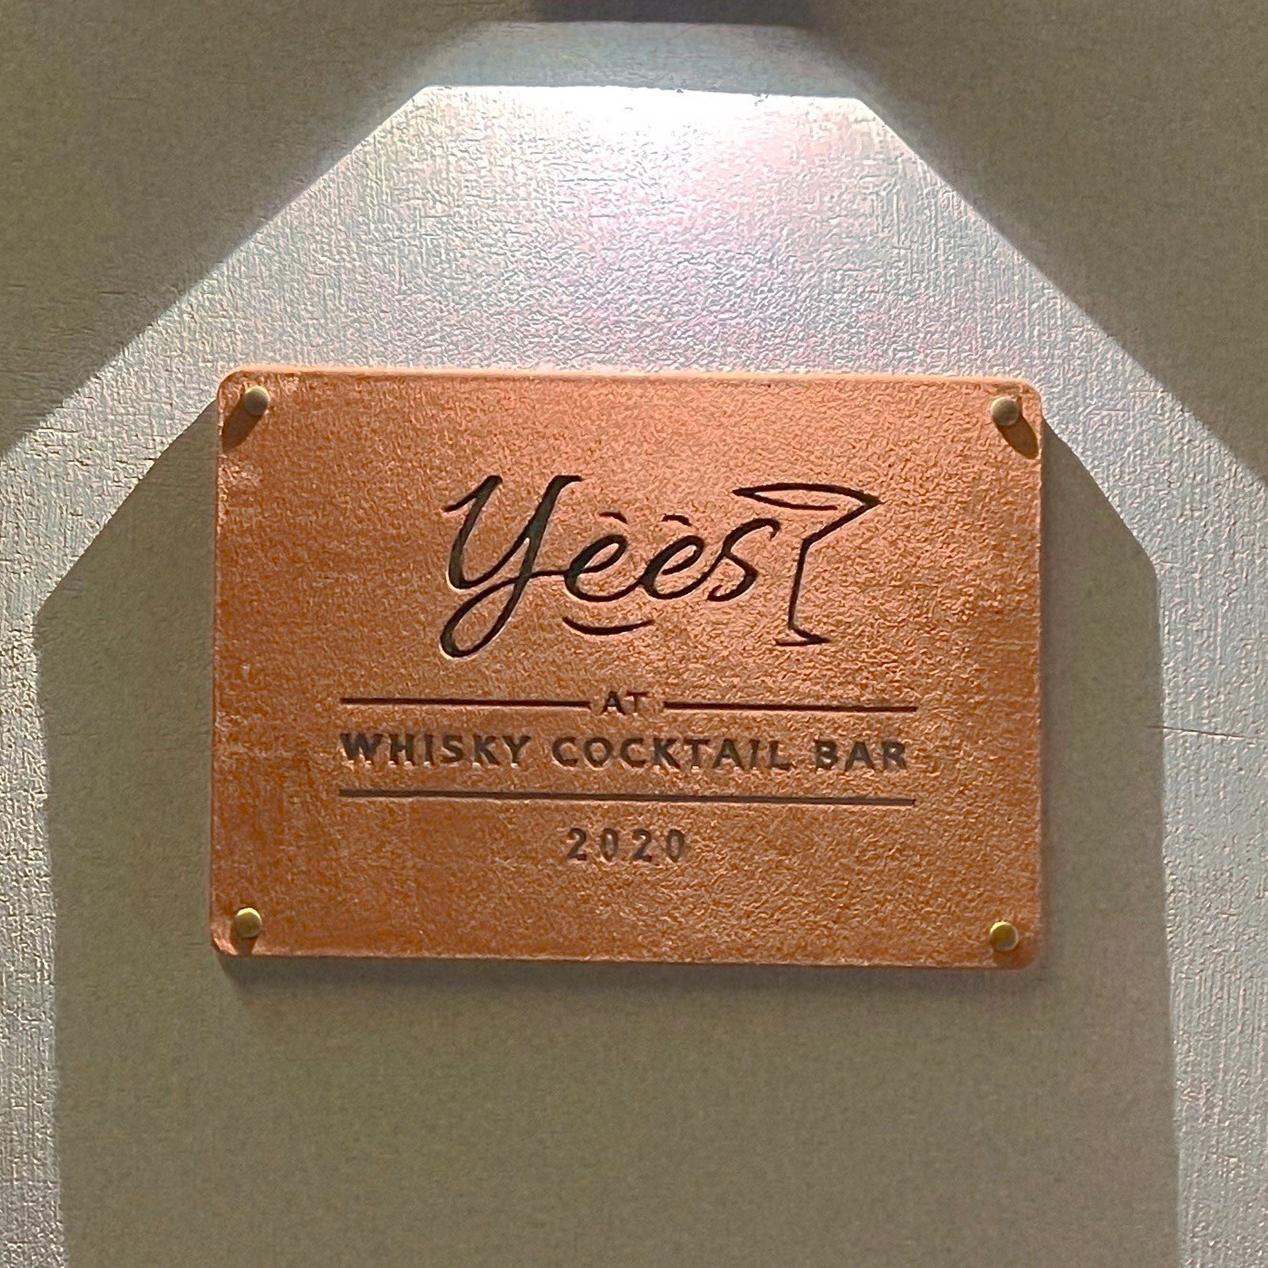 Yees Whisky Cocktail Bar